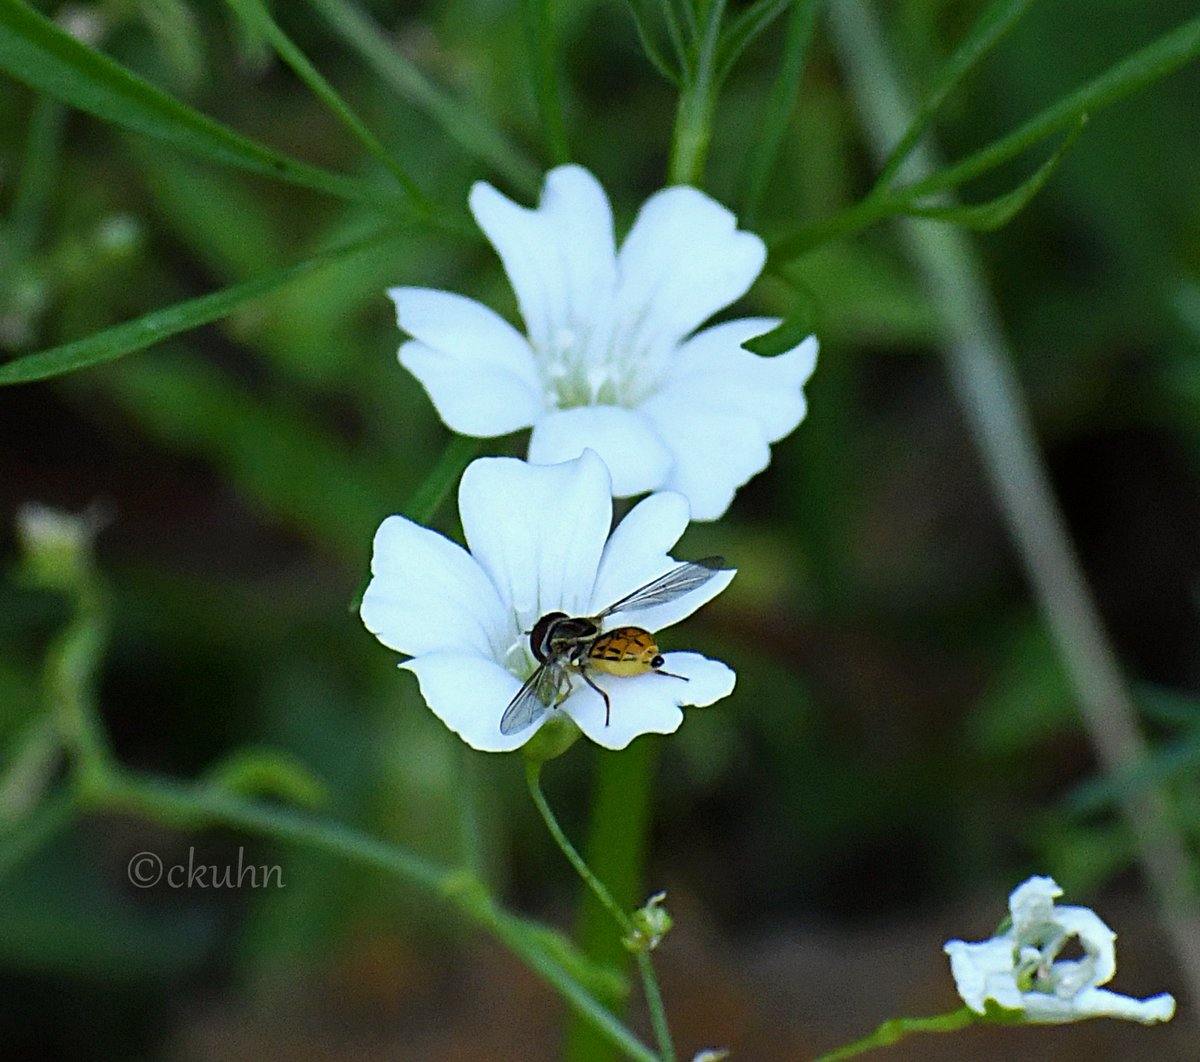 Found this hoverfly sleeping on the Baby's Breath just in time for #InsectThursday. #Insects #NaturePhotography #Nature #Pollinators